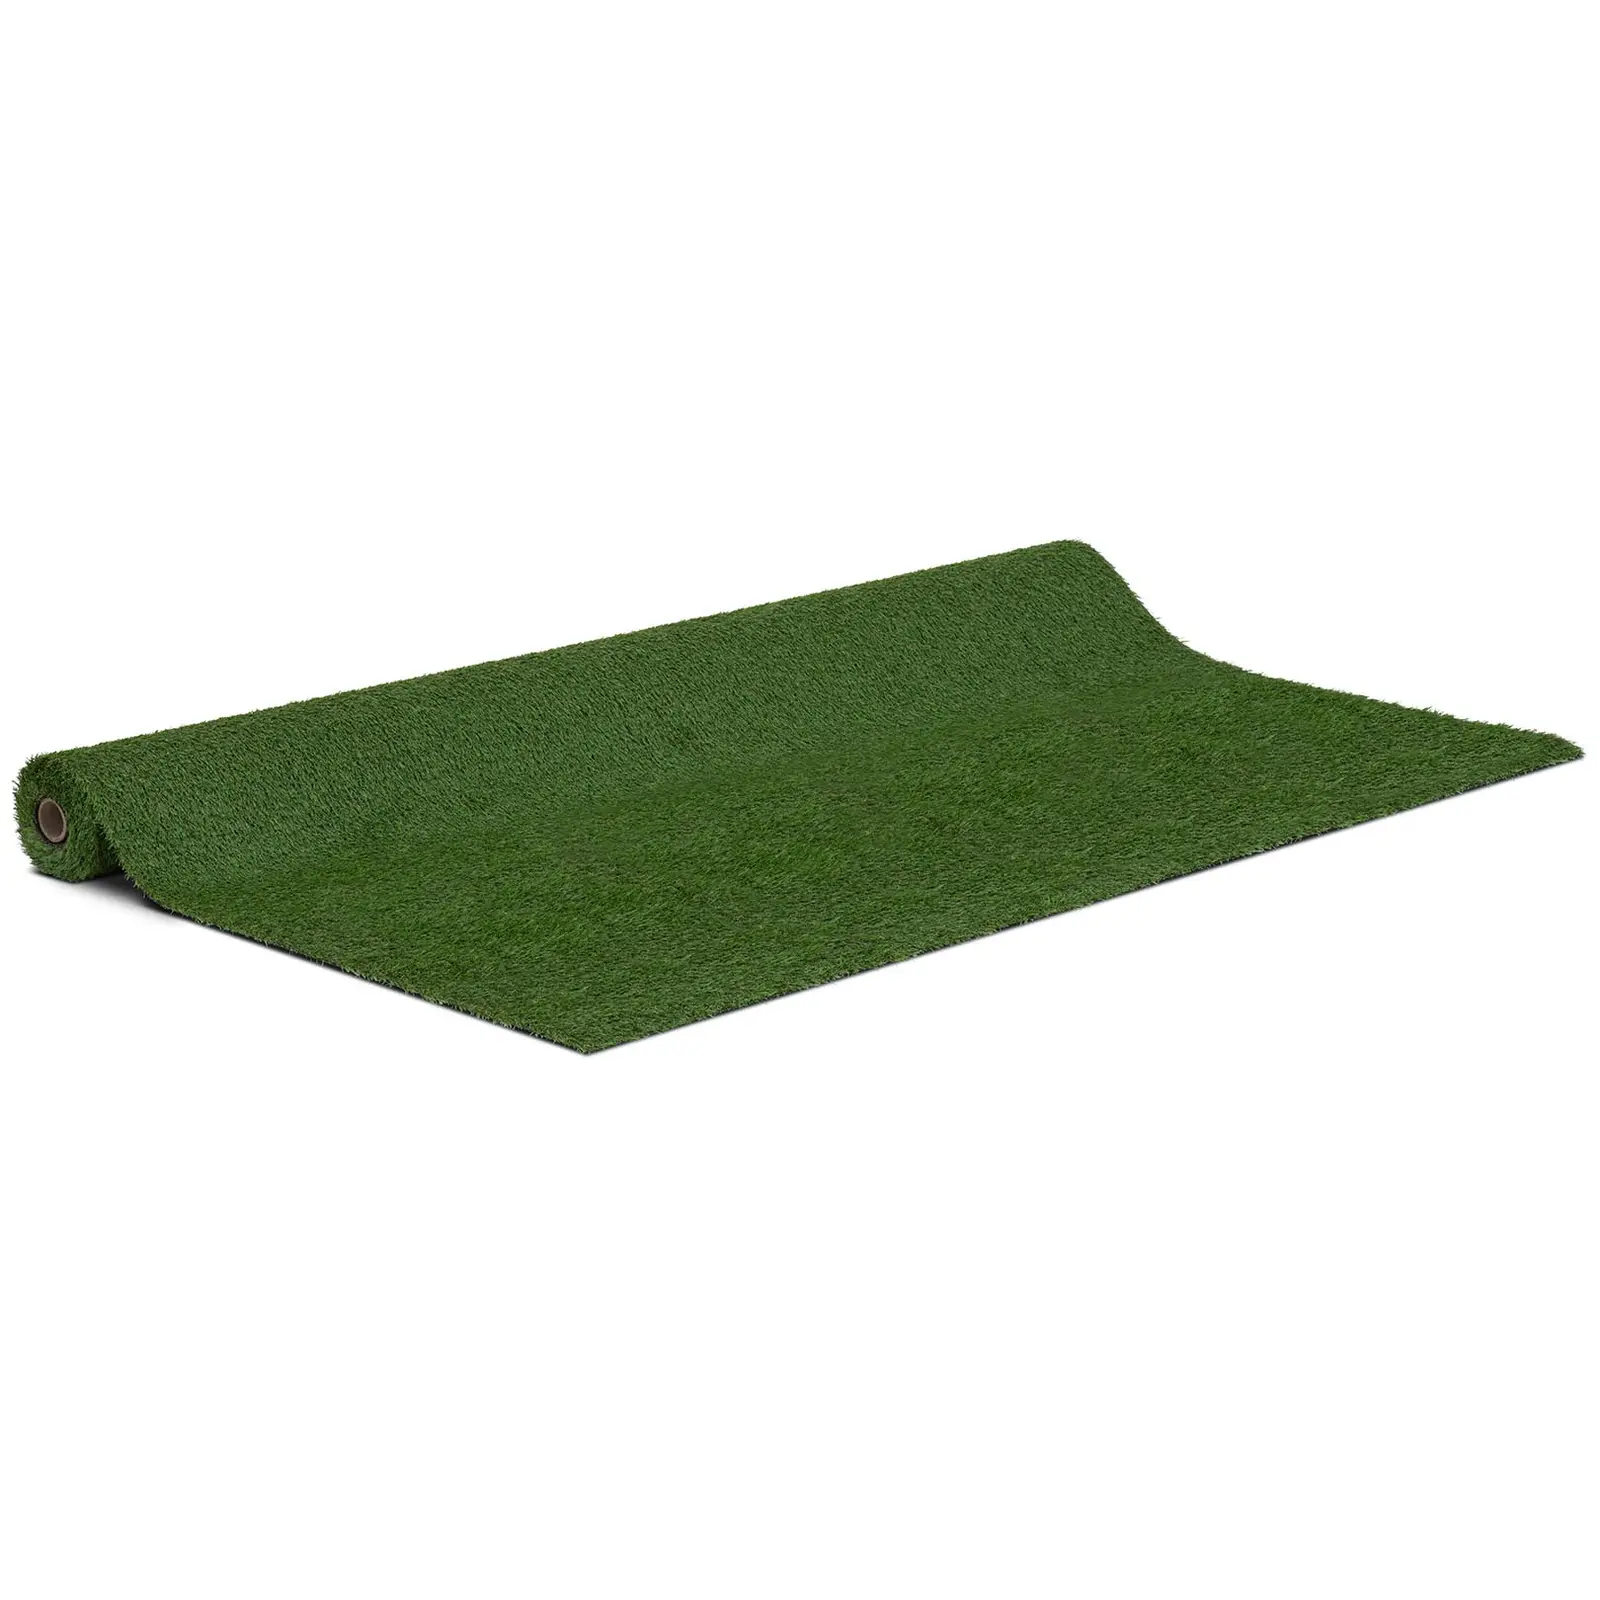 Artificial grass - 200 x 400 cm - Height: 20 mm - Stitch rate: 13/10 cm - UV-resistant